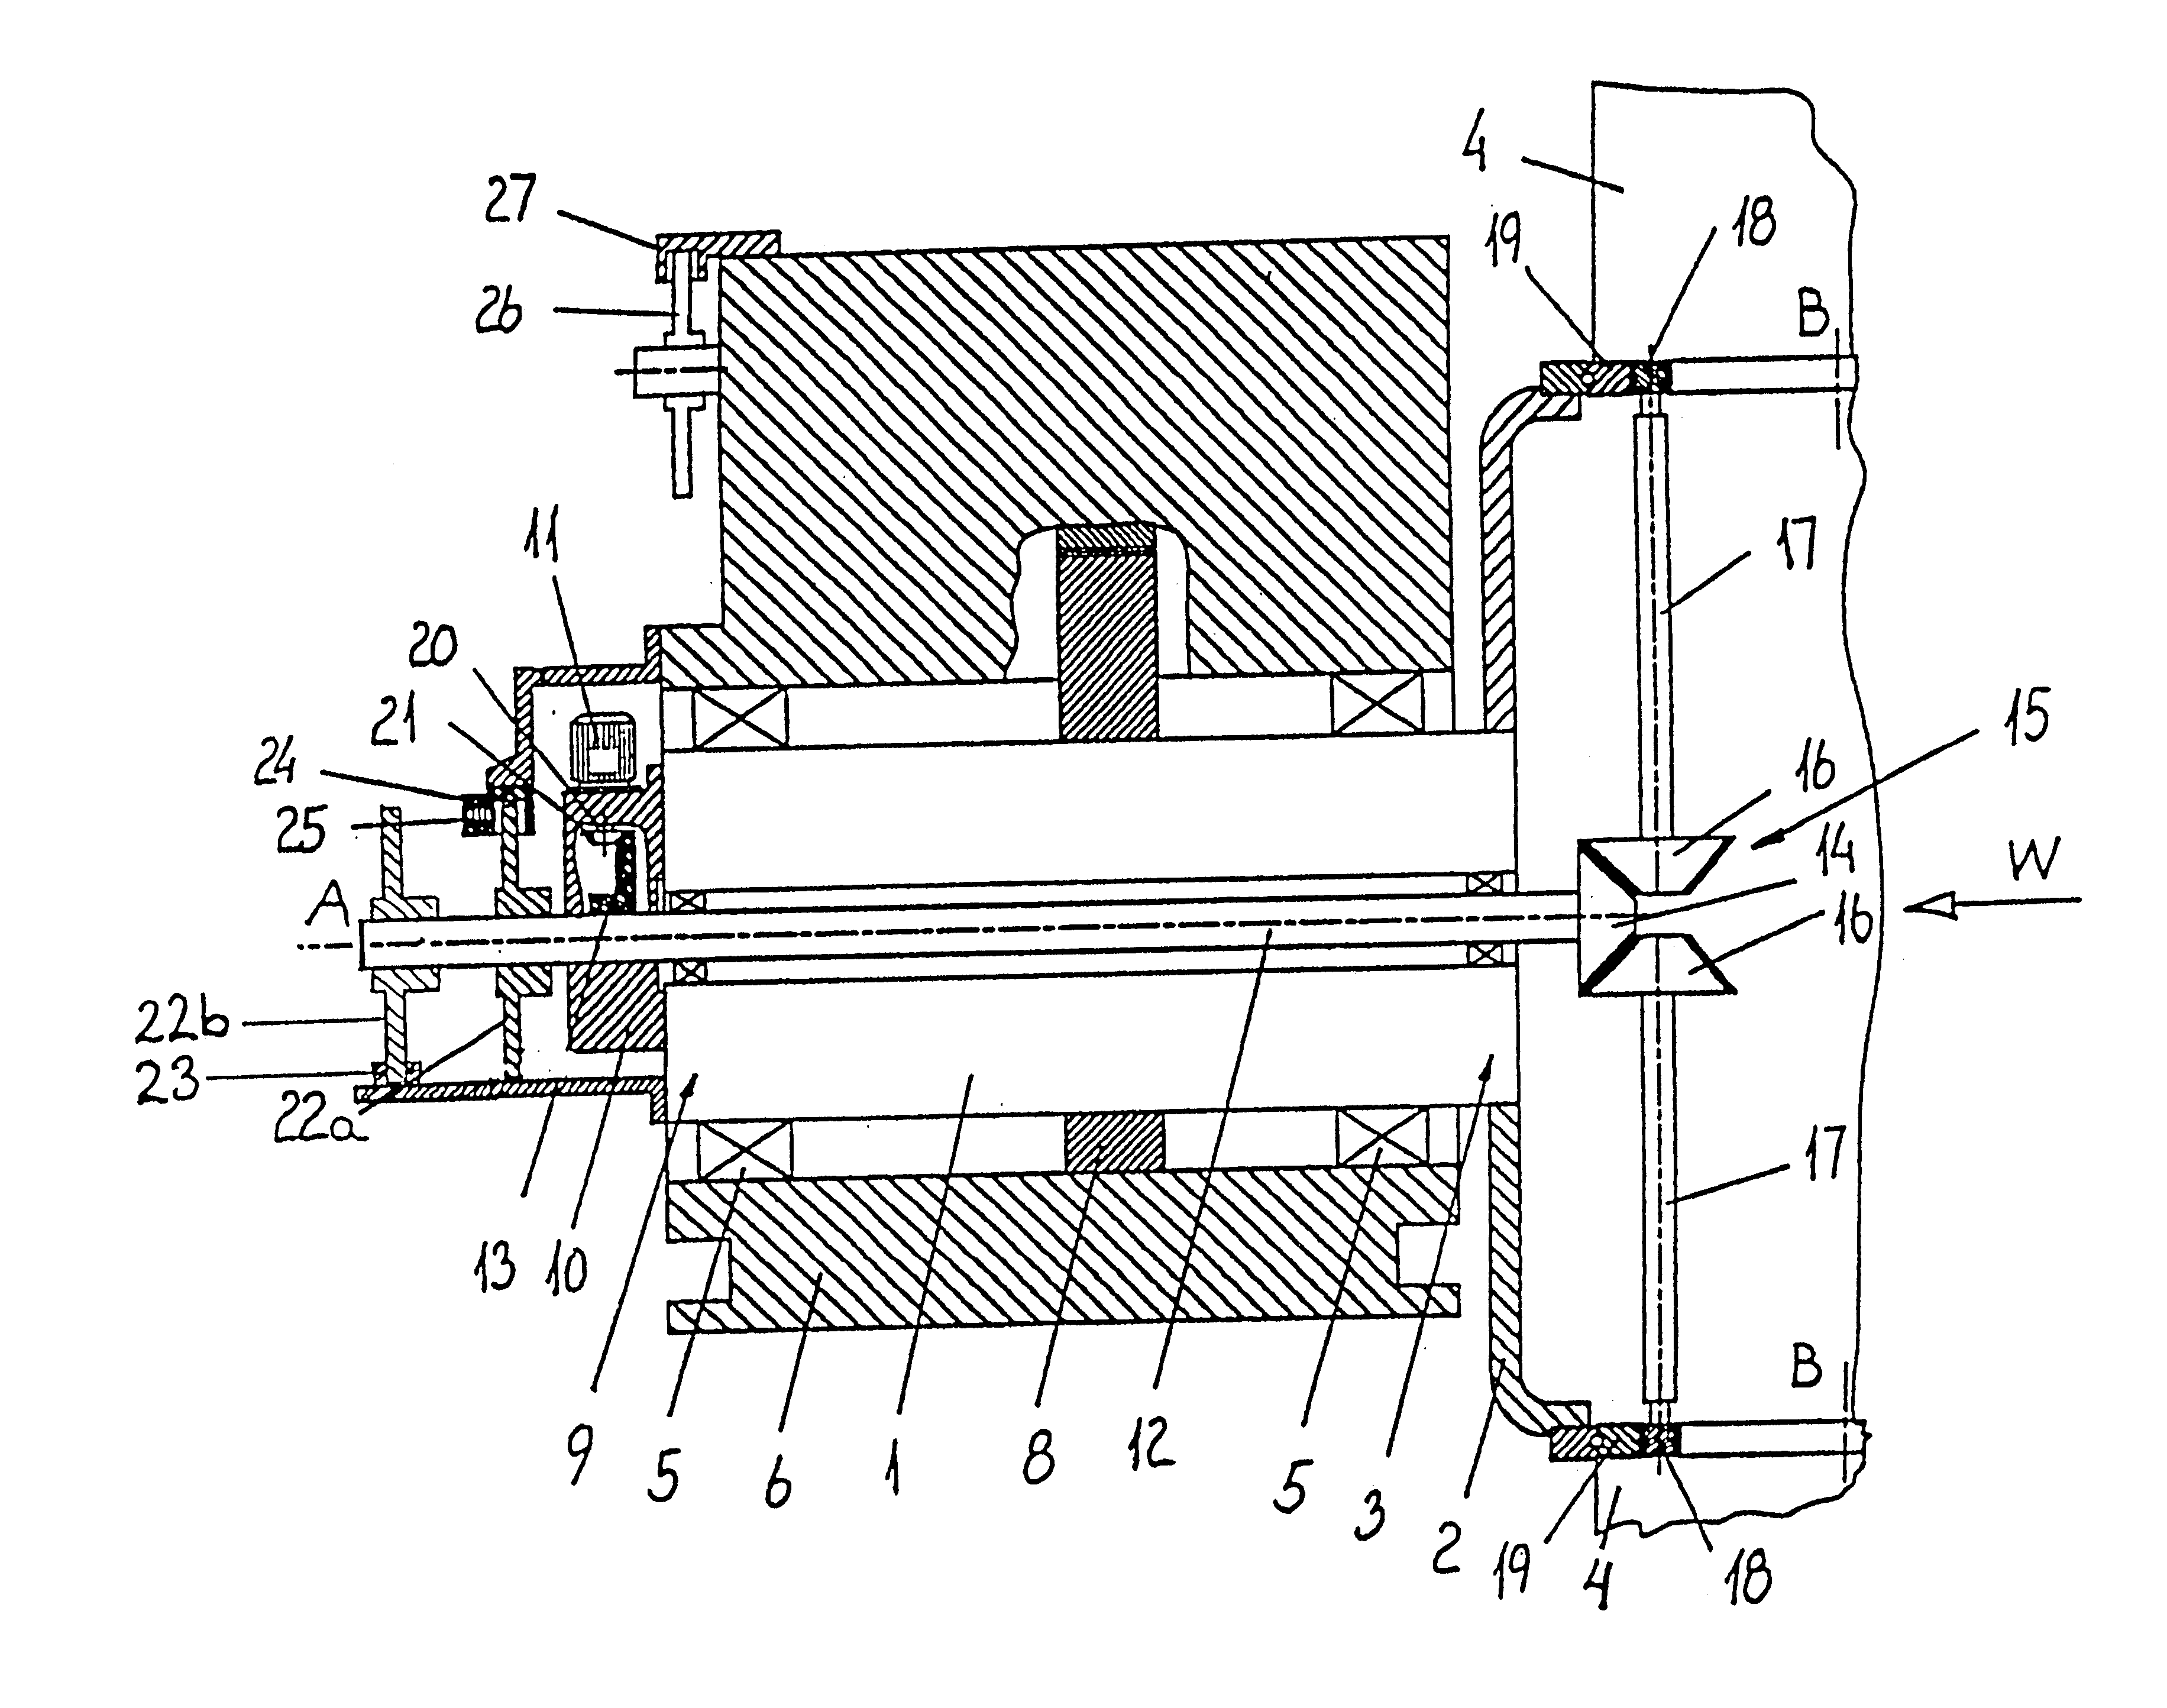 Method and a device for adjusting the pitch and stopping the rotation of the blades of a wind turbine